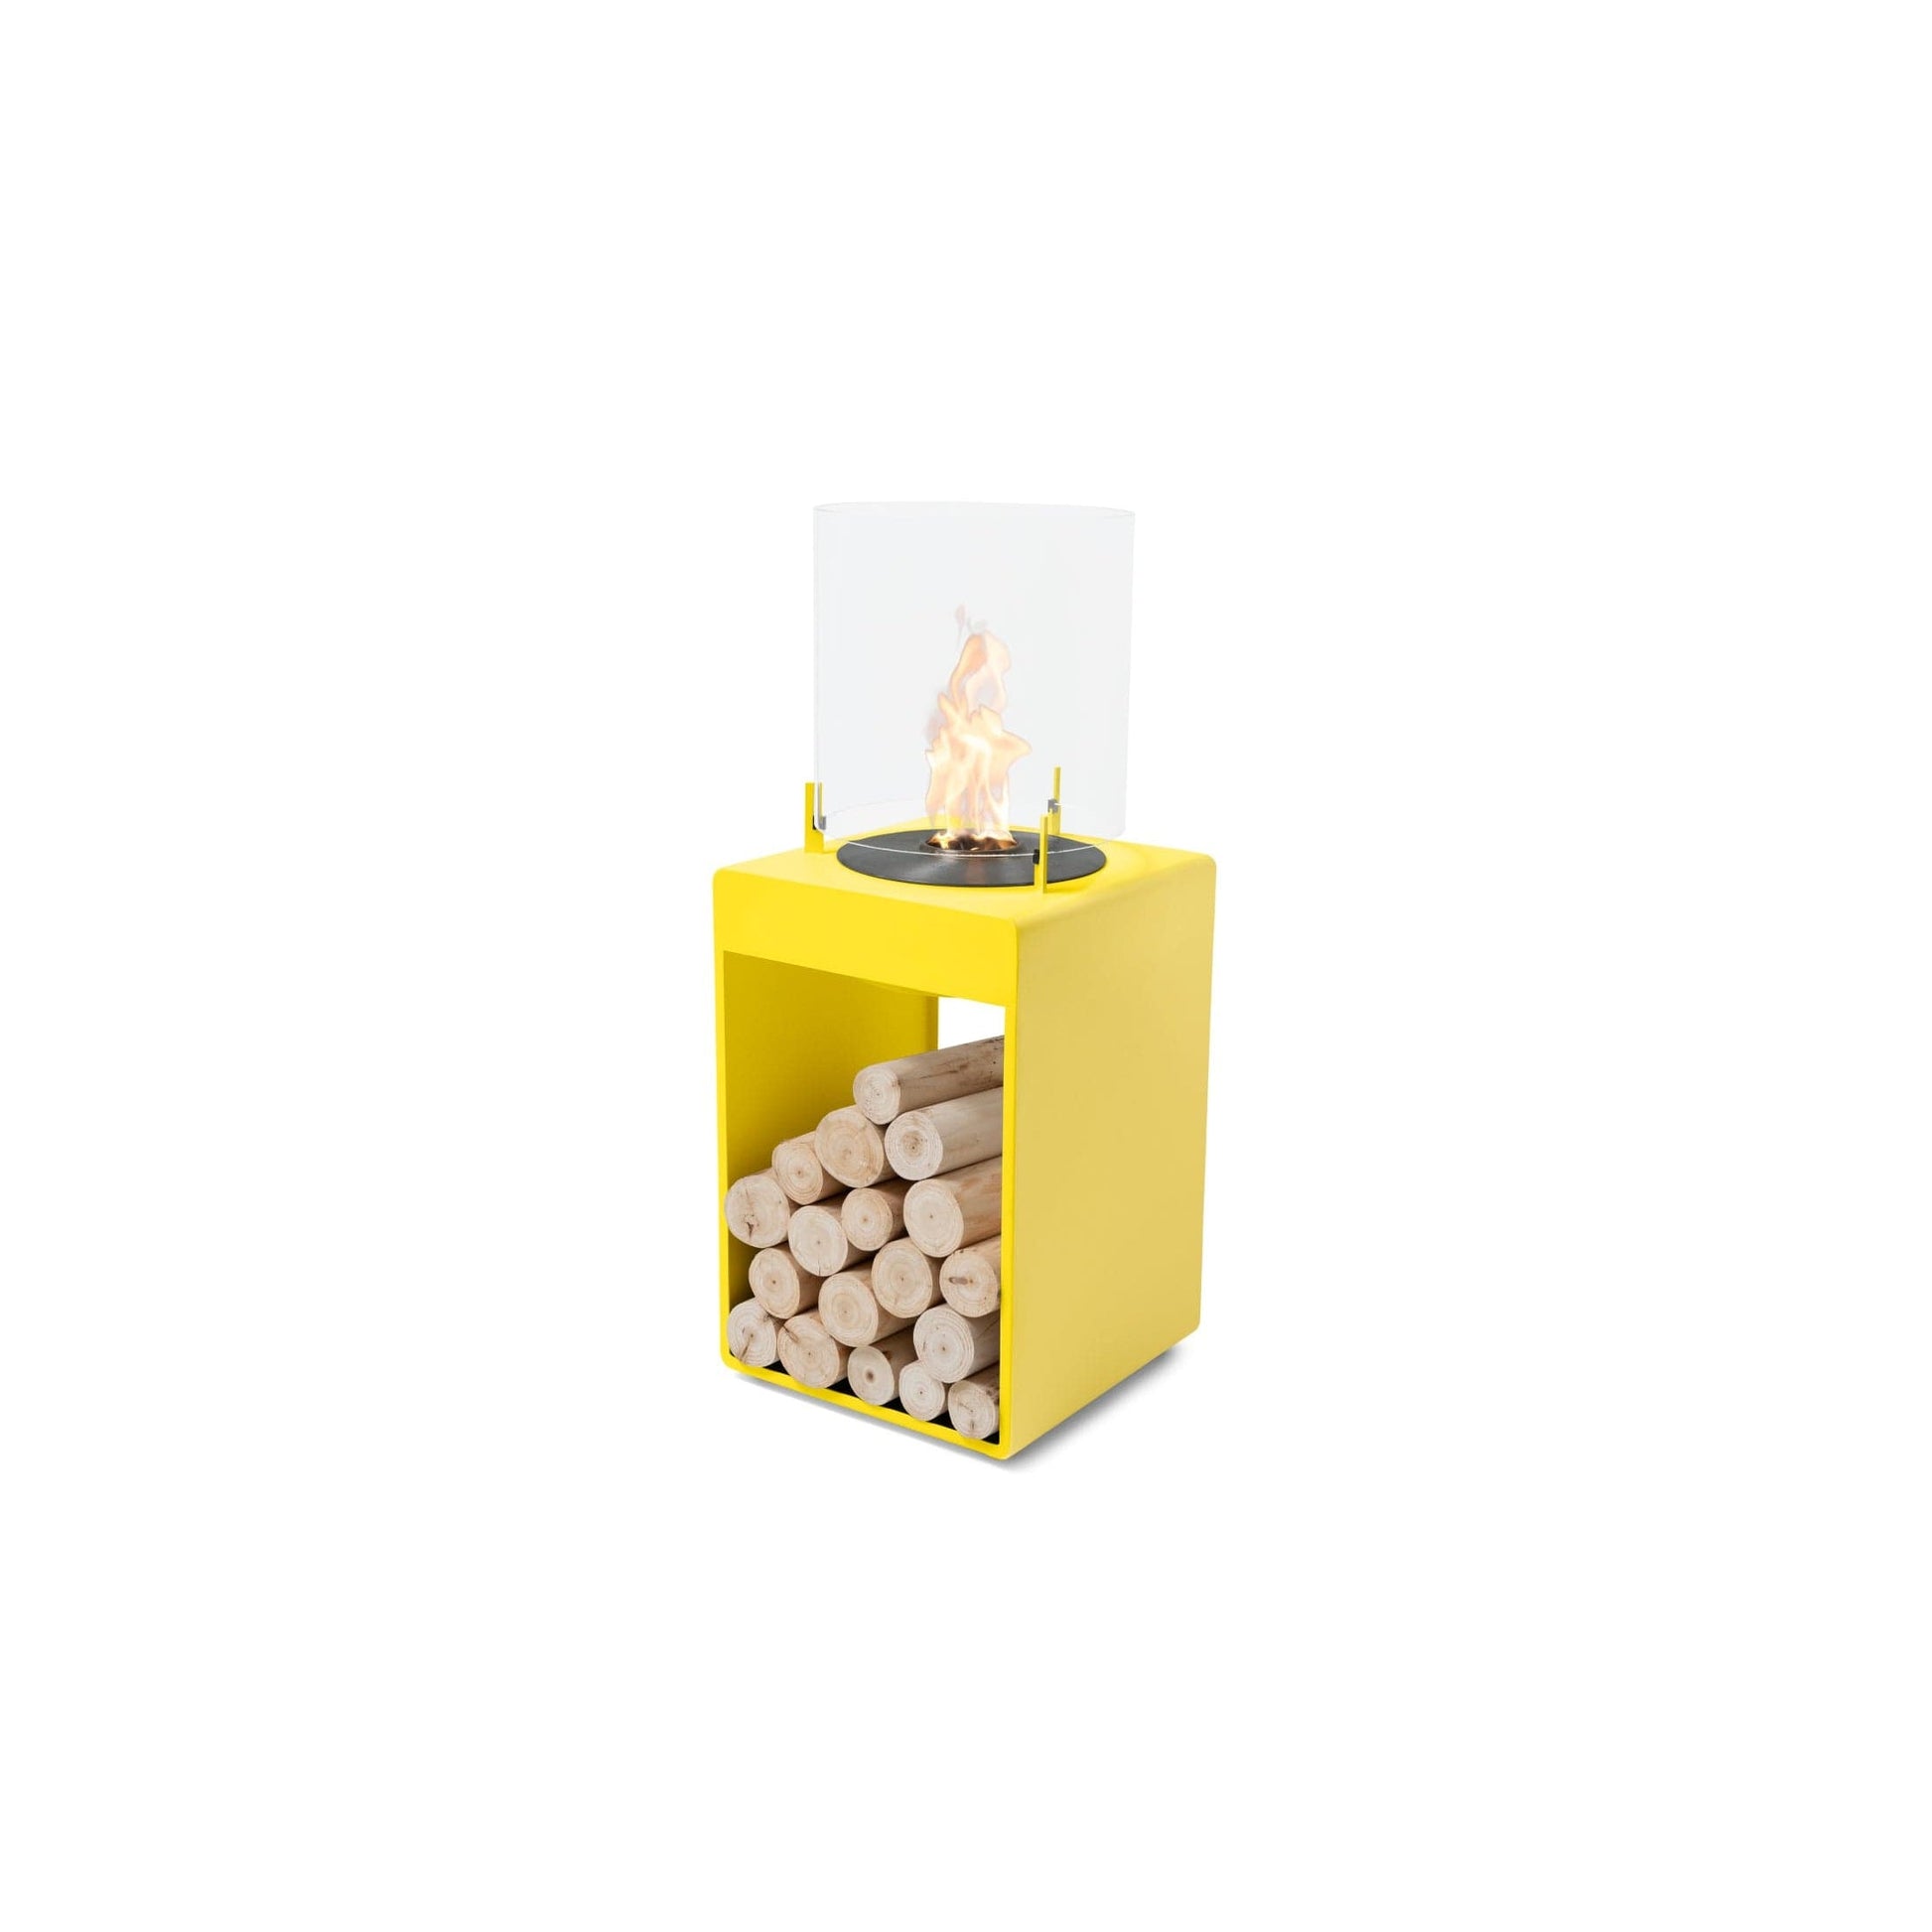 EcoSmart Fire POP 3T 33" Yellow Freestanding Designer Fireplace with Black Burner by MAD Design Group